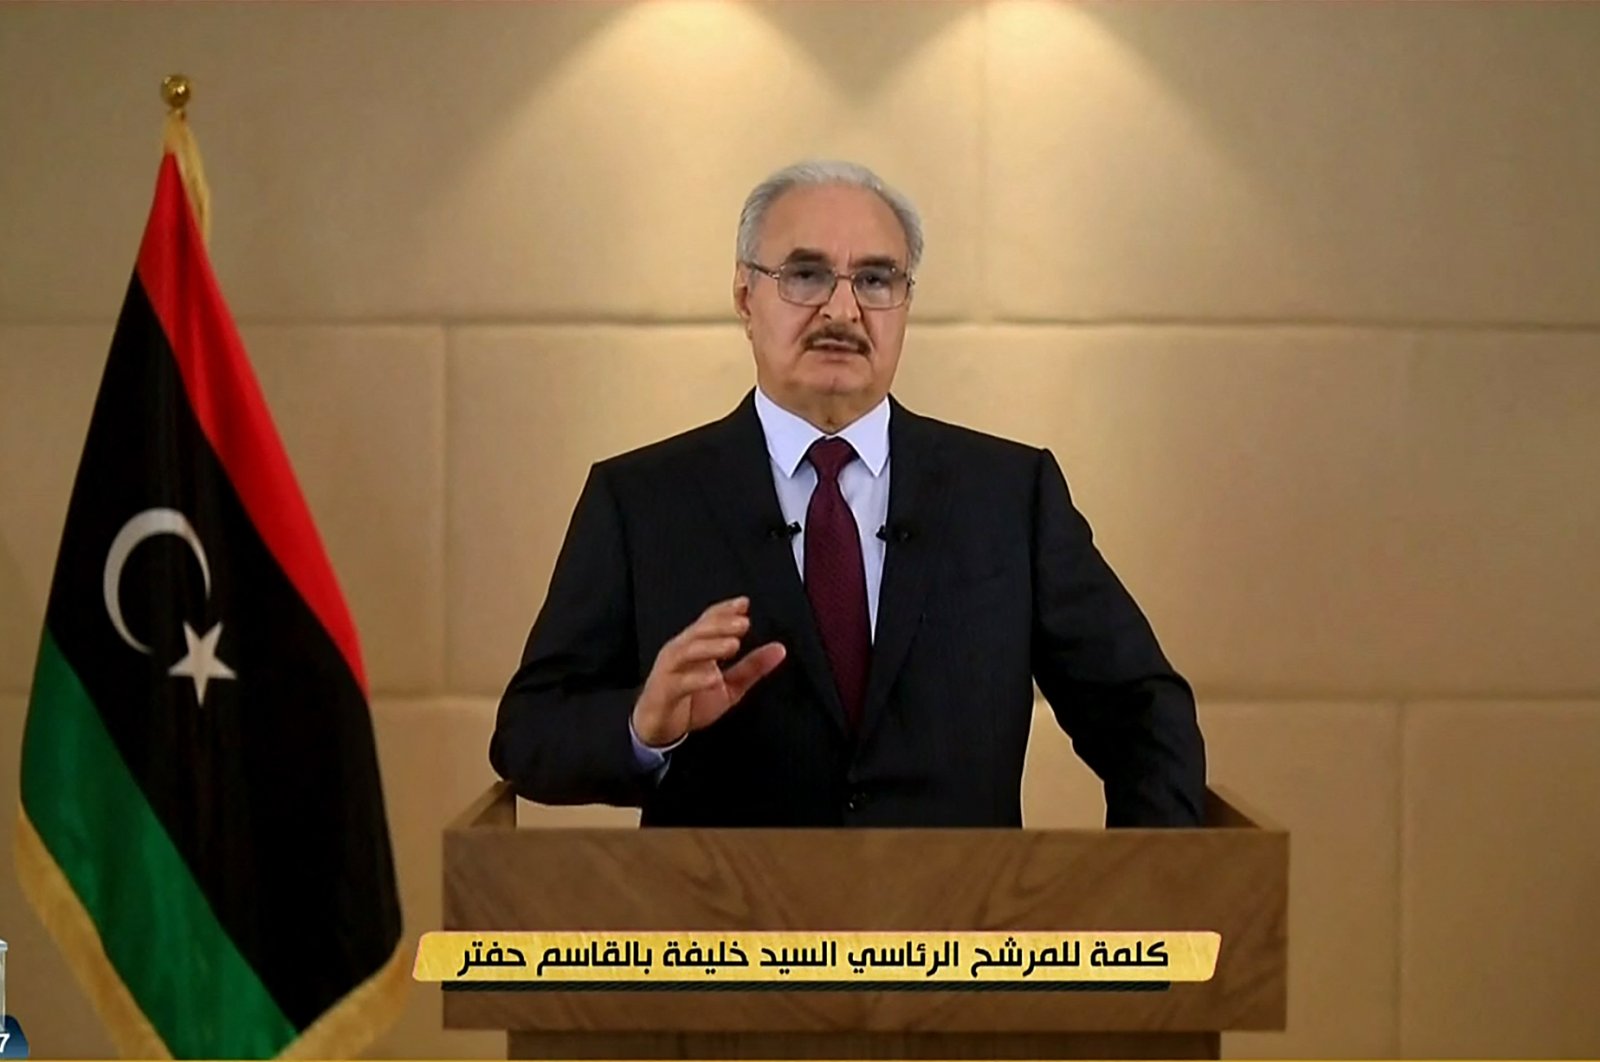 Putschist Gen. Khalifa Haftar announces his candidacy for next month&#039;s presidential election during a televised speech in this screengrab from Libya Alhadath TV on Nov. 16, 2021. (AFP Photo)